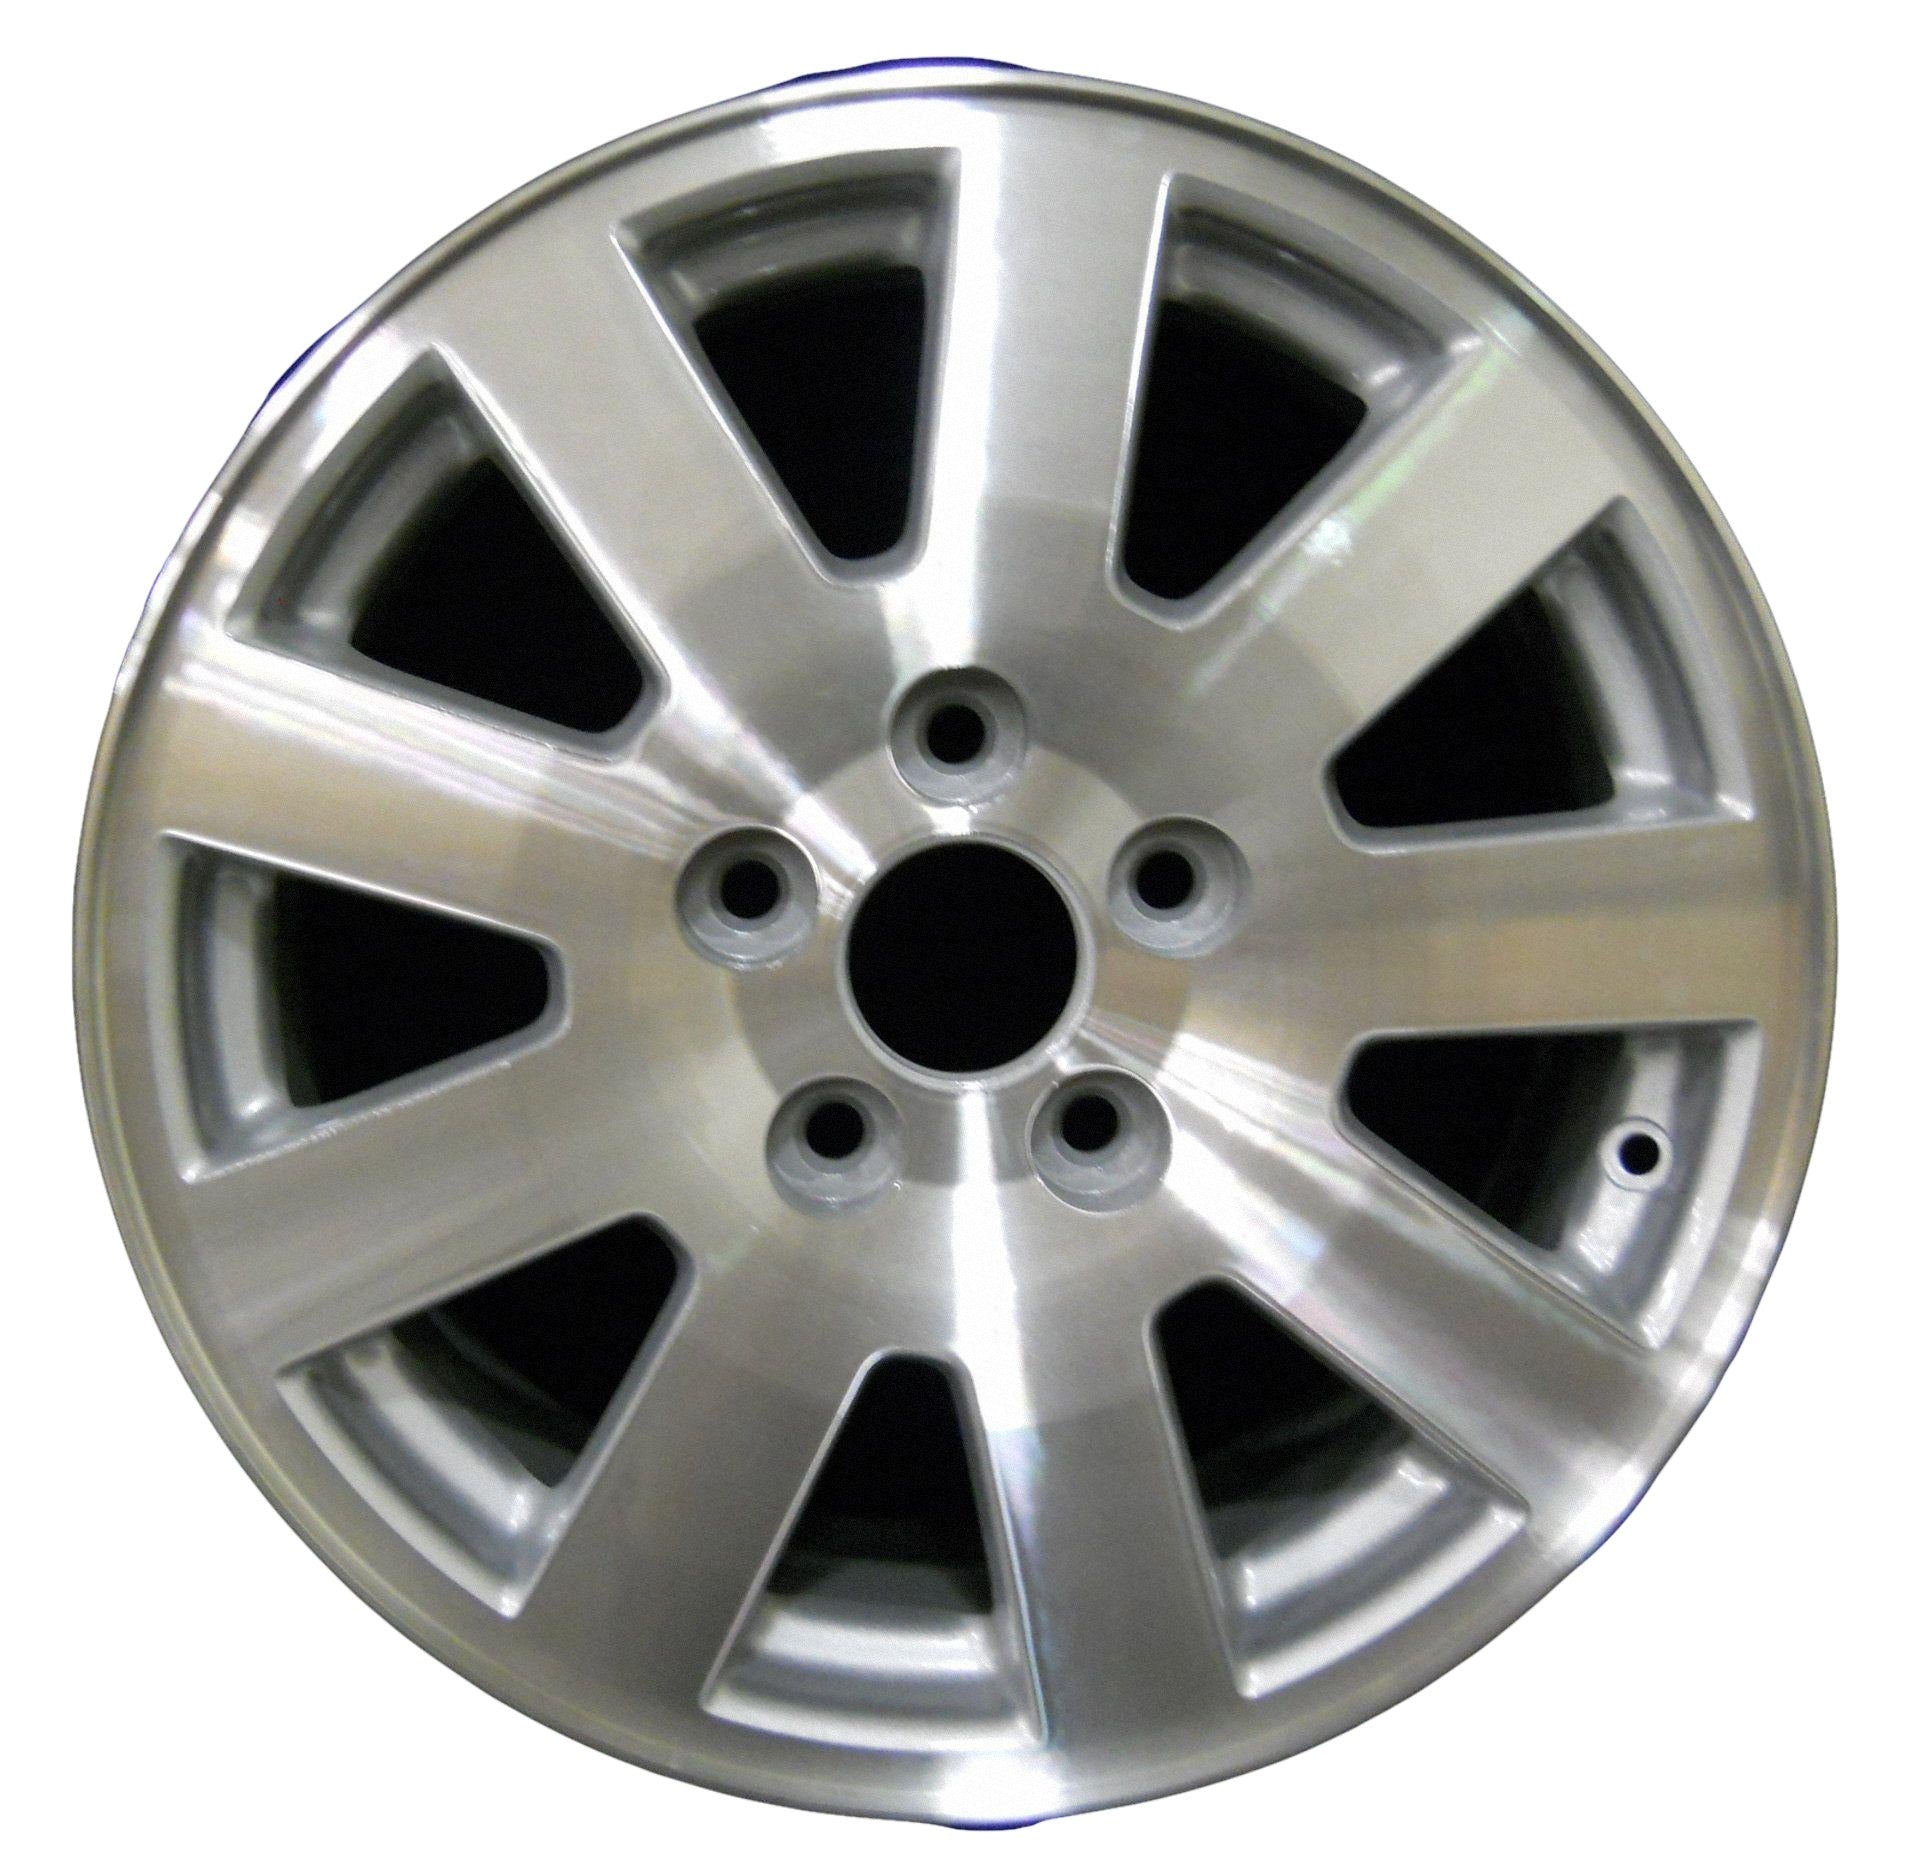 Ford Crown Victoria  2006, 2007, 2008, 2009, 2010, 2011 Factory OEM Car Wheel Size 16x7 Alloy WAO.3622.PS02.MA